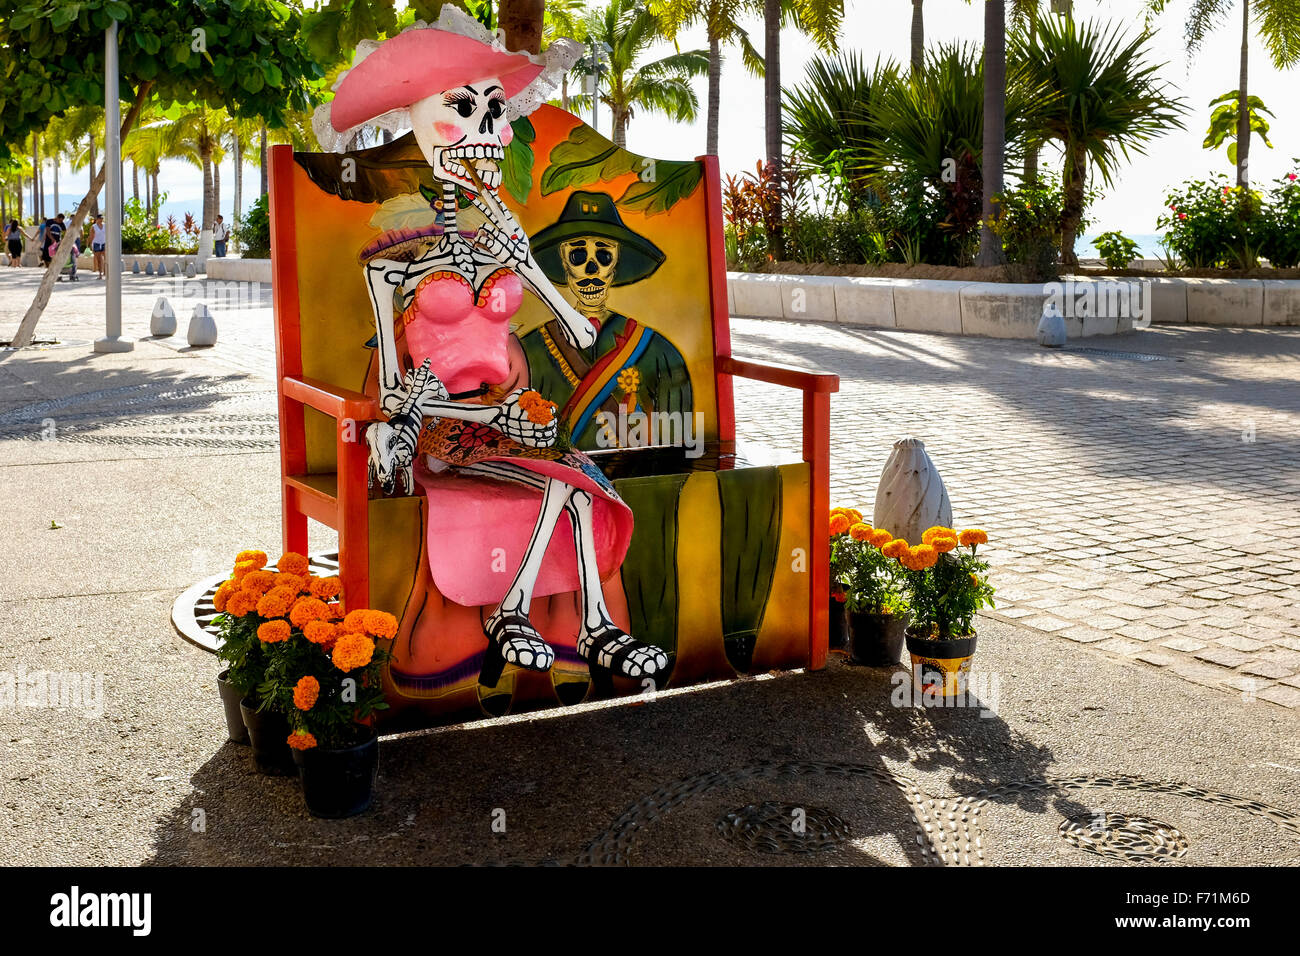 Wooden bench seat decorated and painted to celebrate the festival of death and Halloween, Puerto Vallarta, Mexico Stock Photo